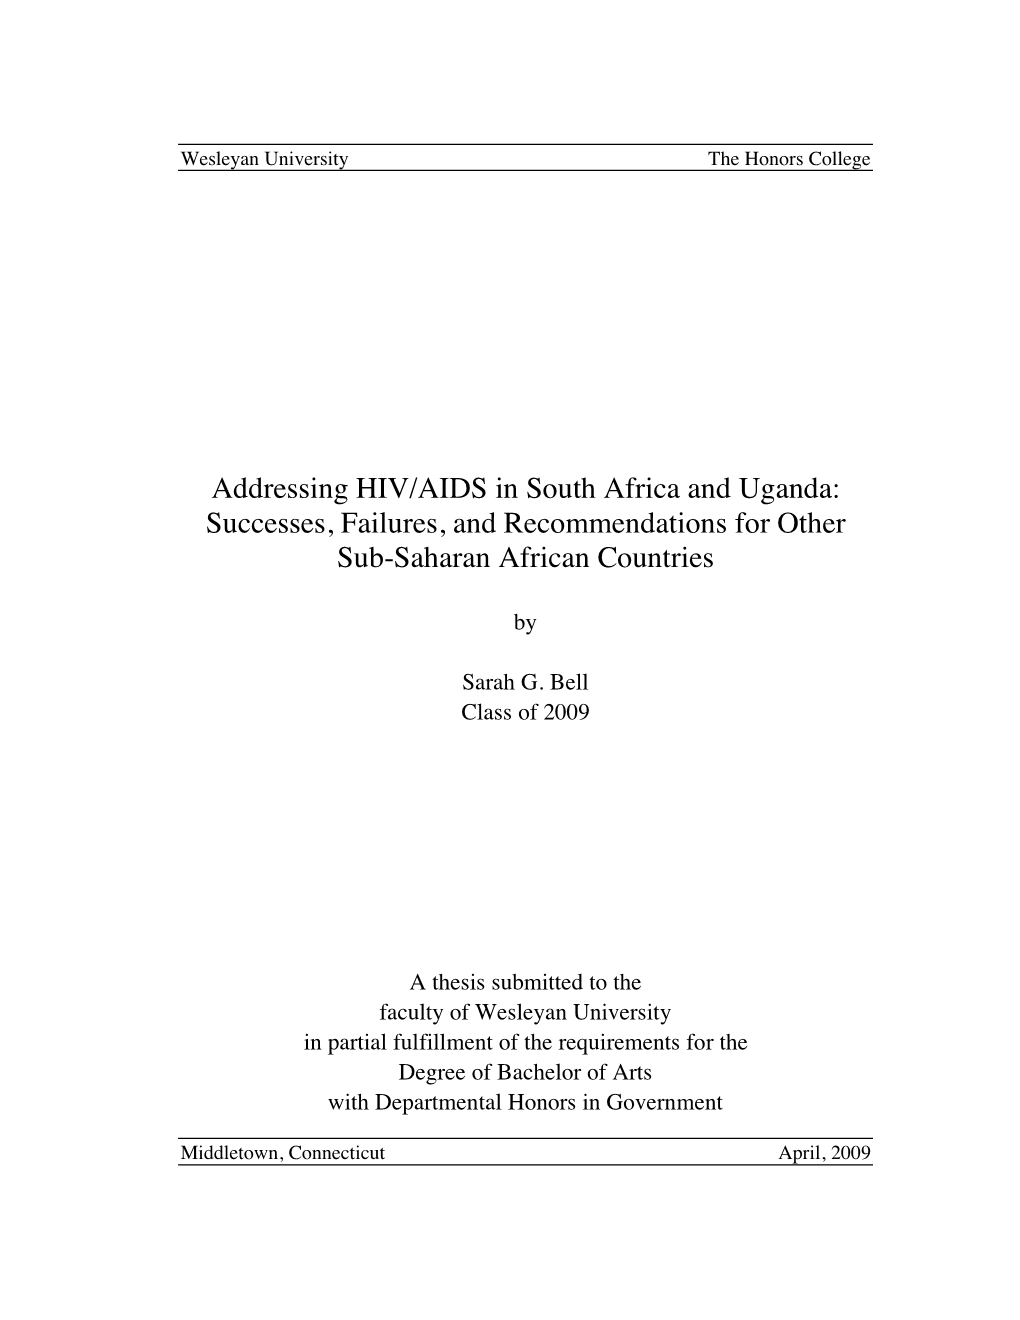 Addressing HIV/AIDS in South Africa and Uganda: Successes, Failures, and Recommendations for Other Sub-Saharan African Countries